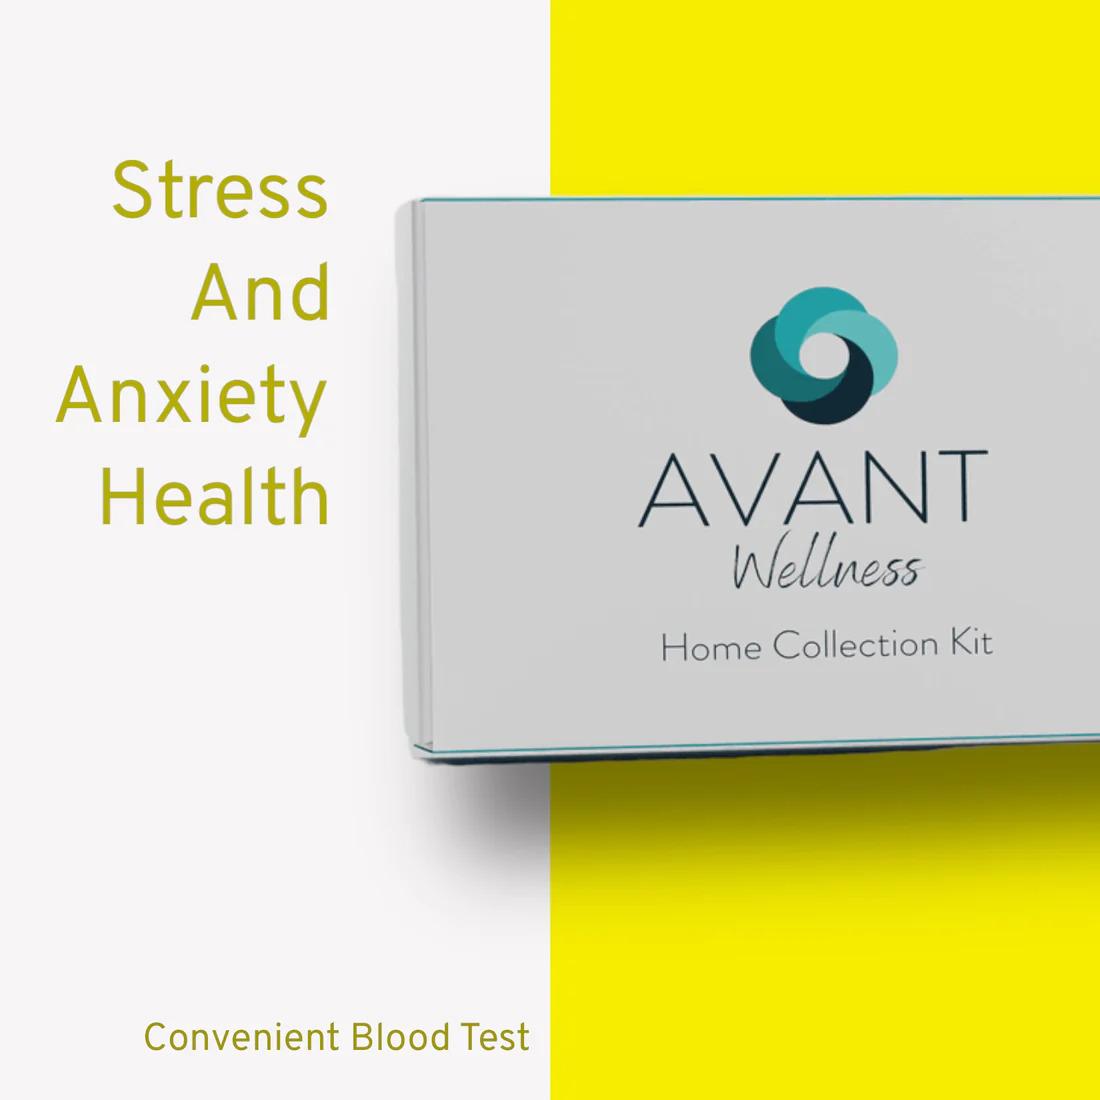 Home Collection Kits for Stress & Anxiety monitoring